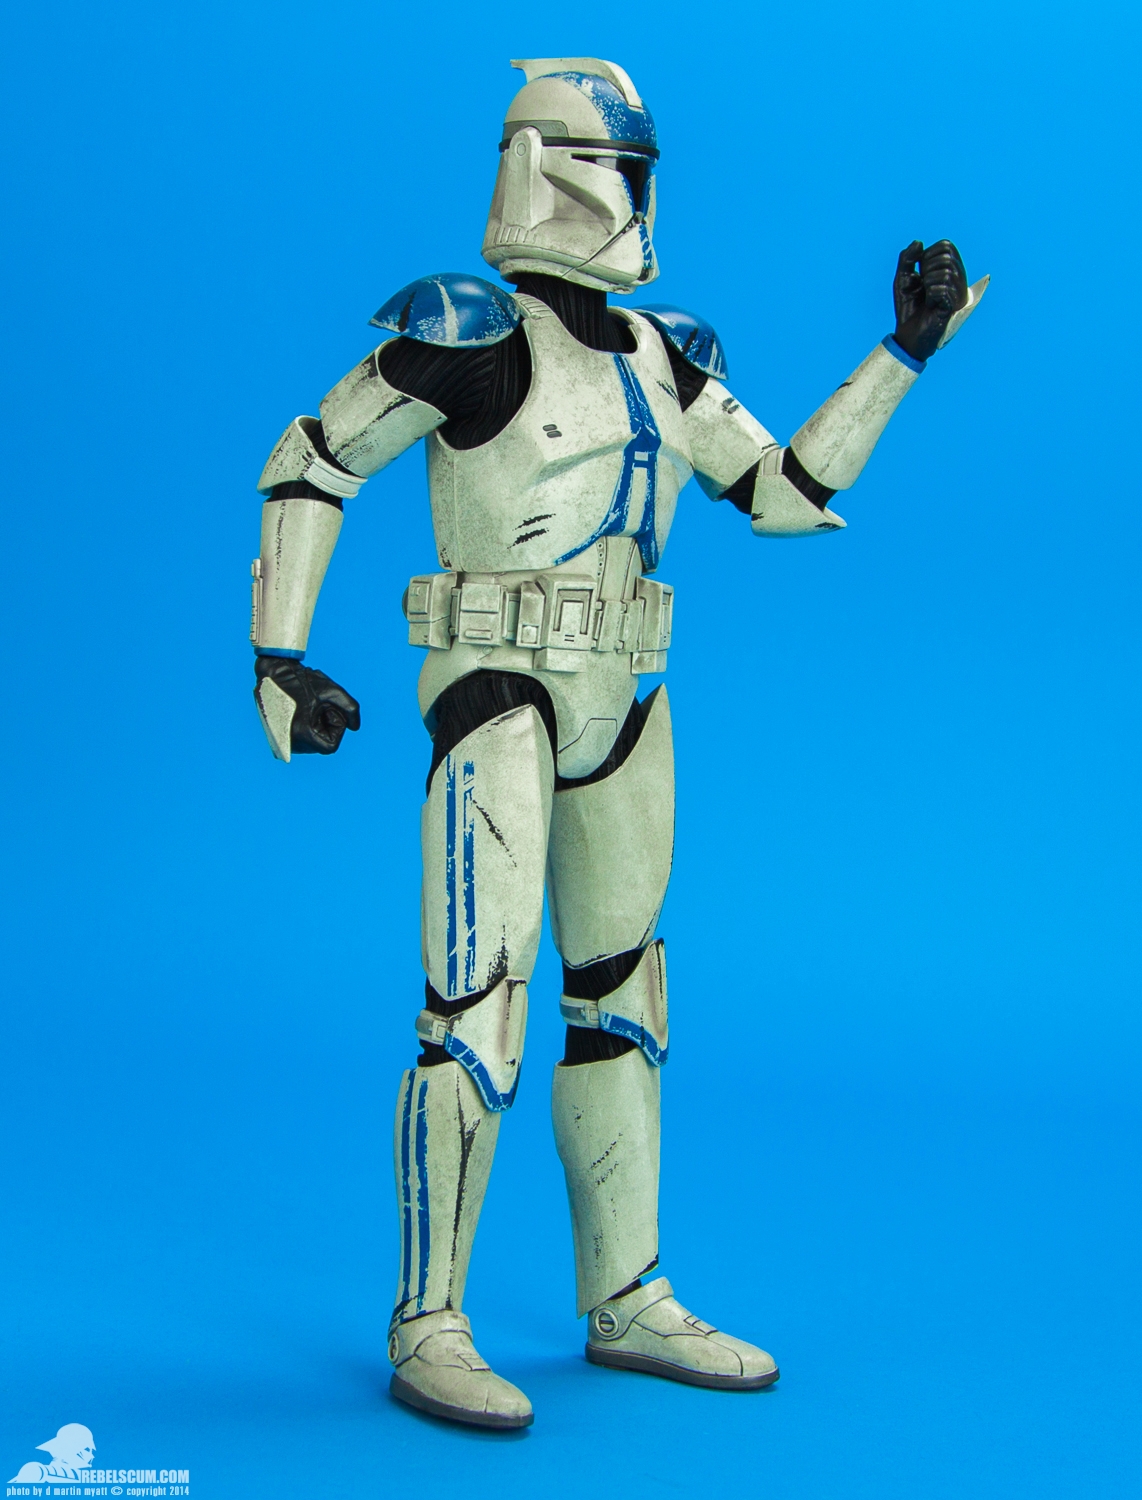 Clone-Trooper-Deluxe-501st-Sixth-Scale-Figure-Sideshow-002.jpg